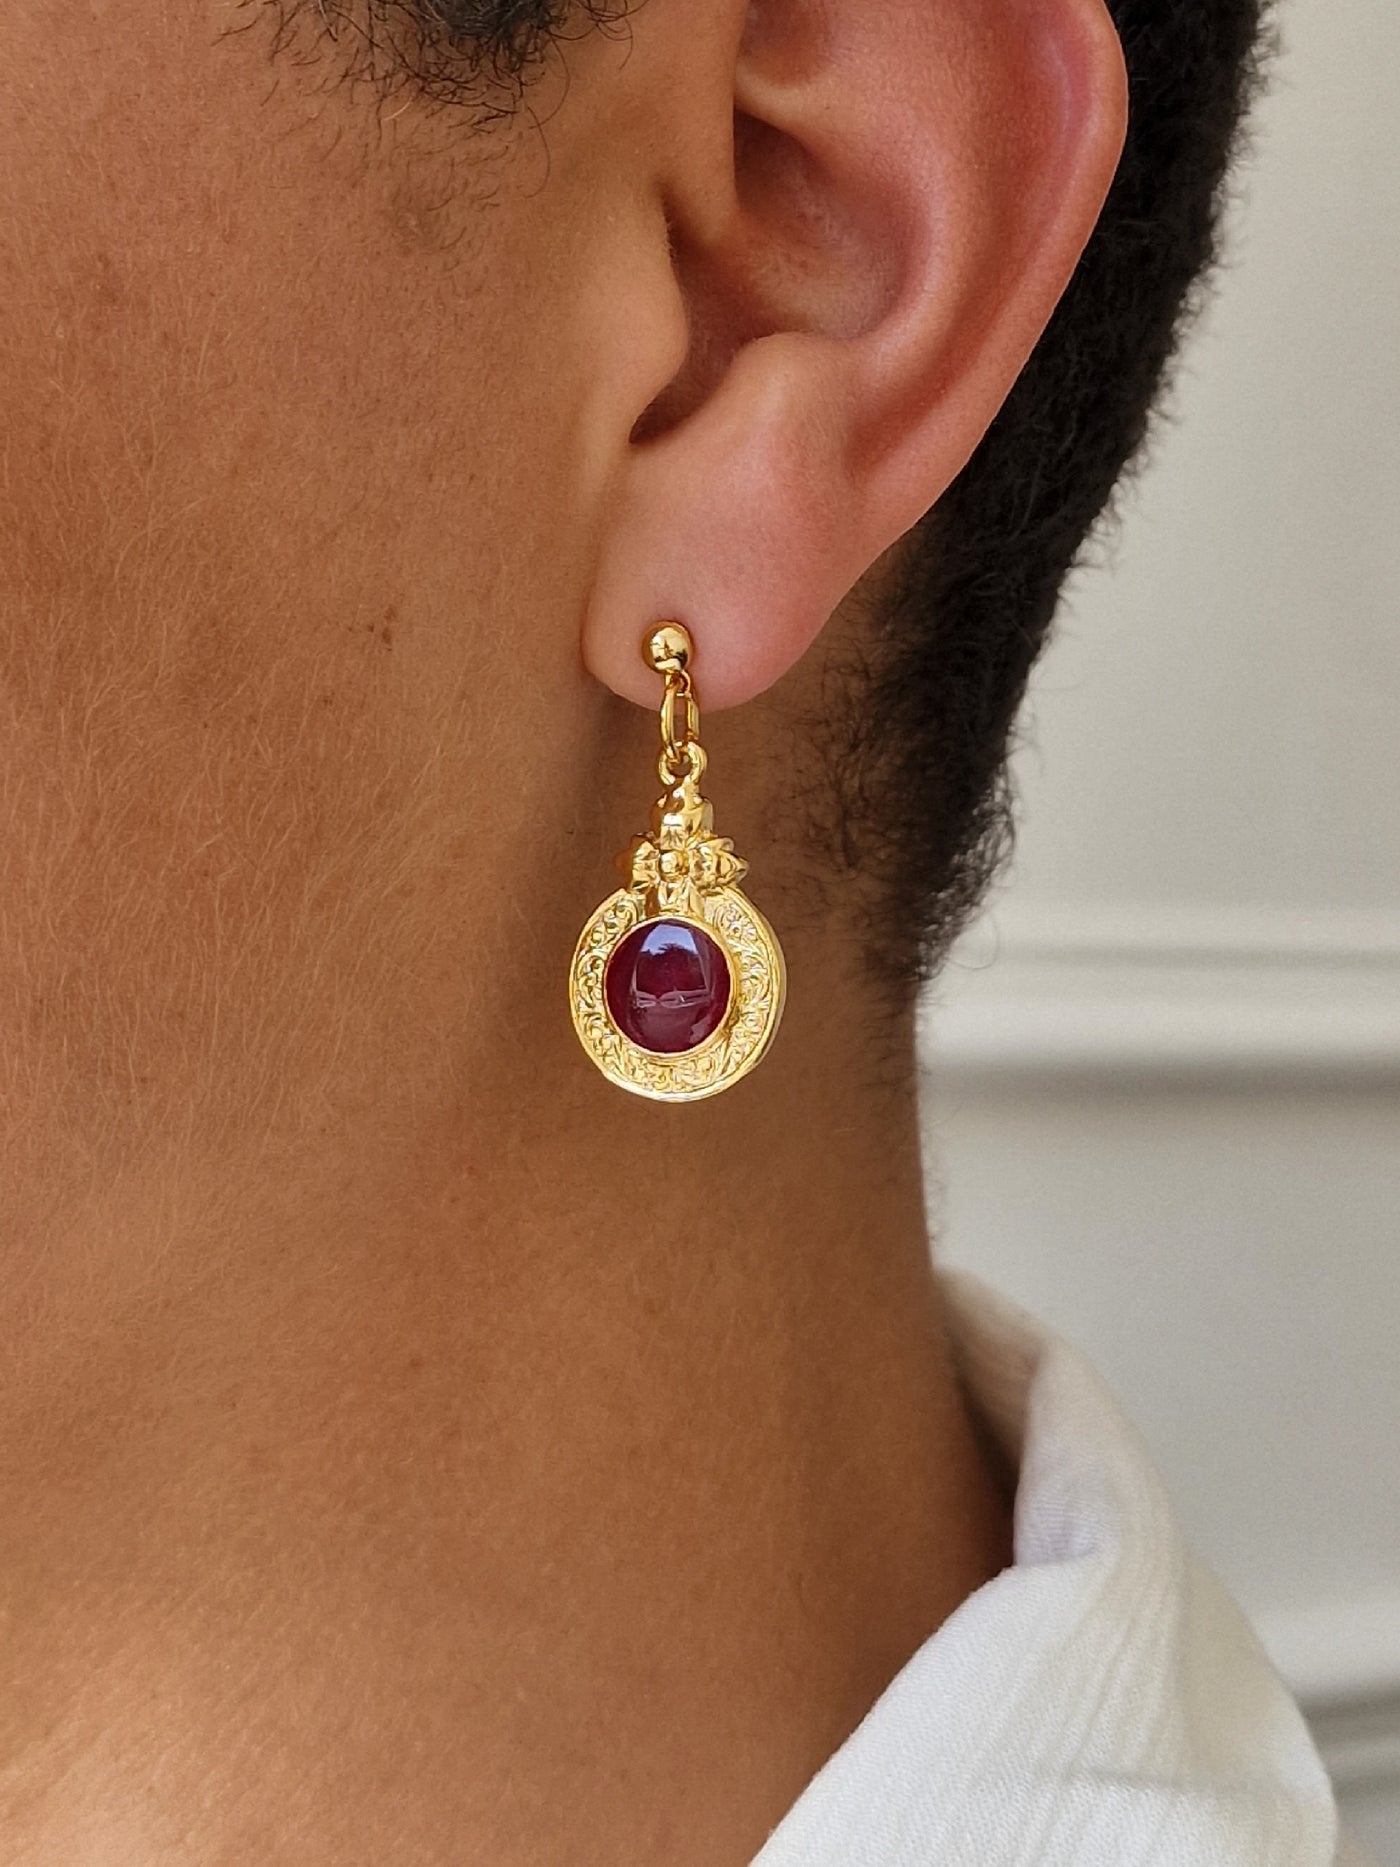 Vintage Gold Plated Round Drop Earrings with Dark Red Enamel